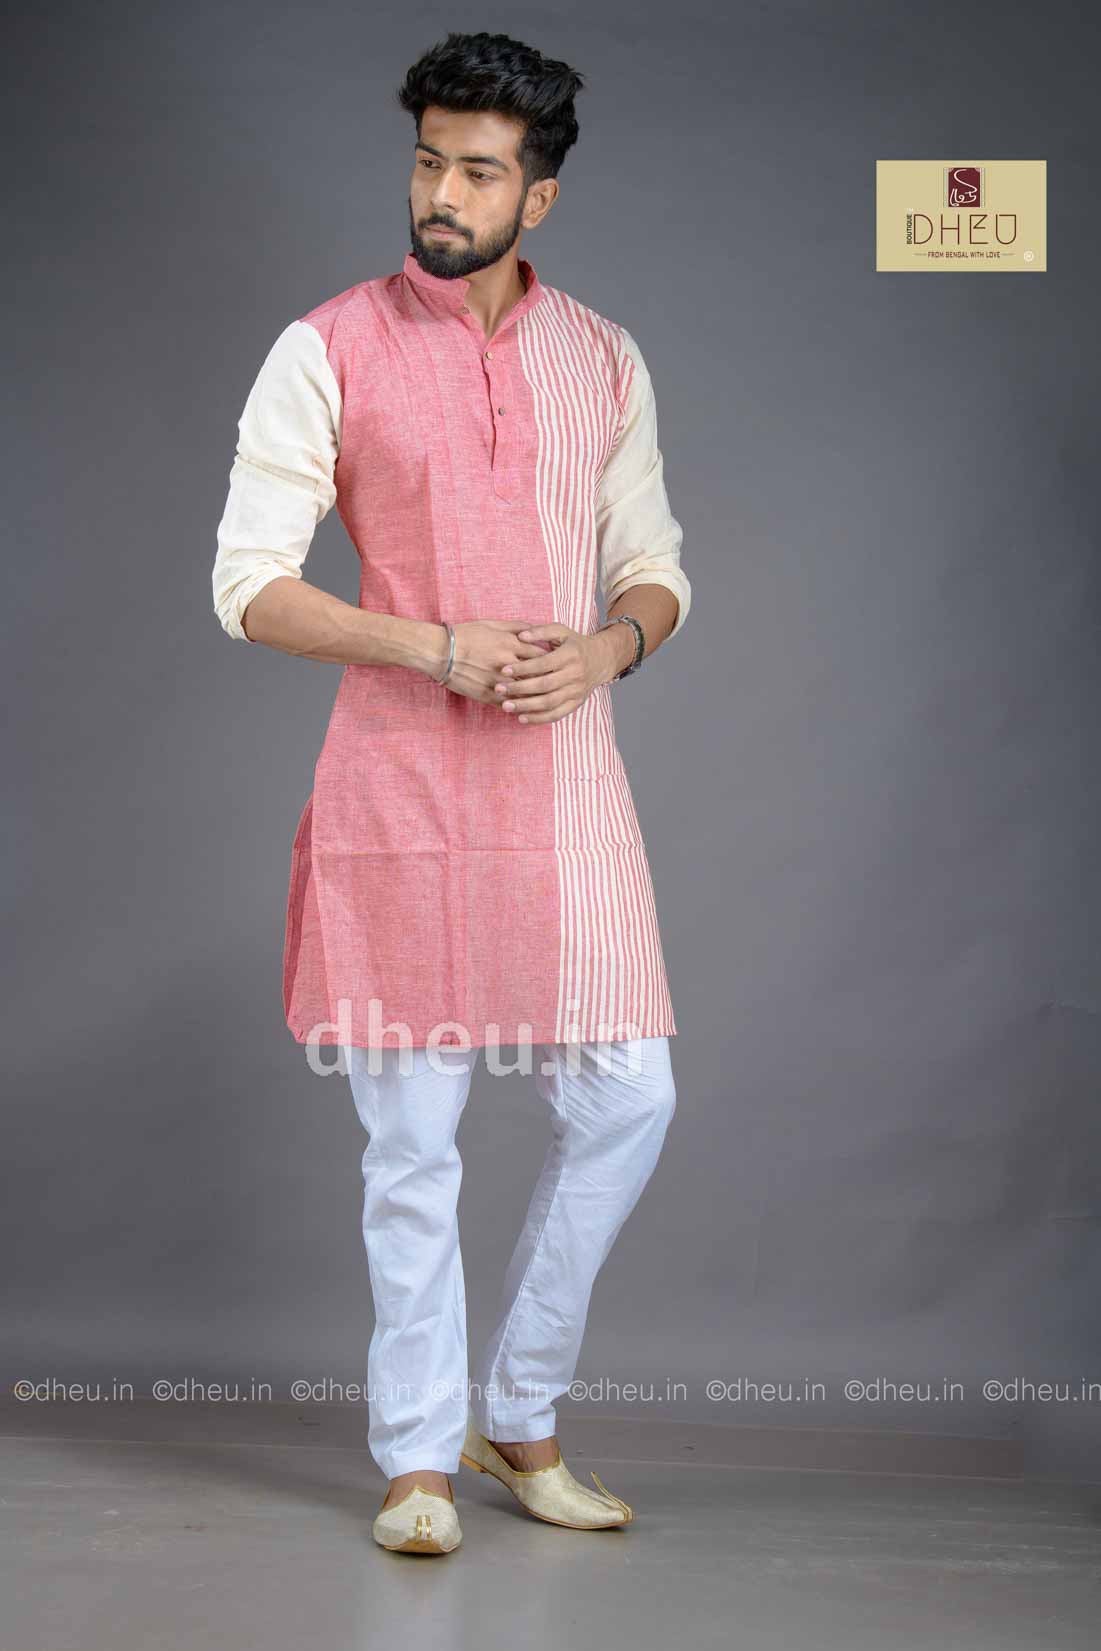 Casual designer pink kurta at low cost only in dheu.in